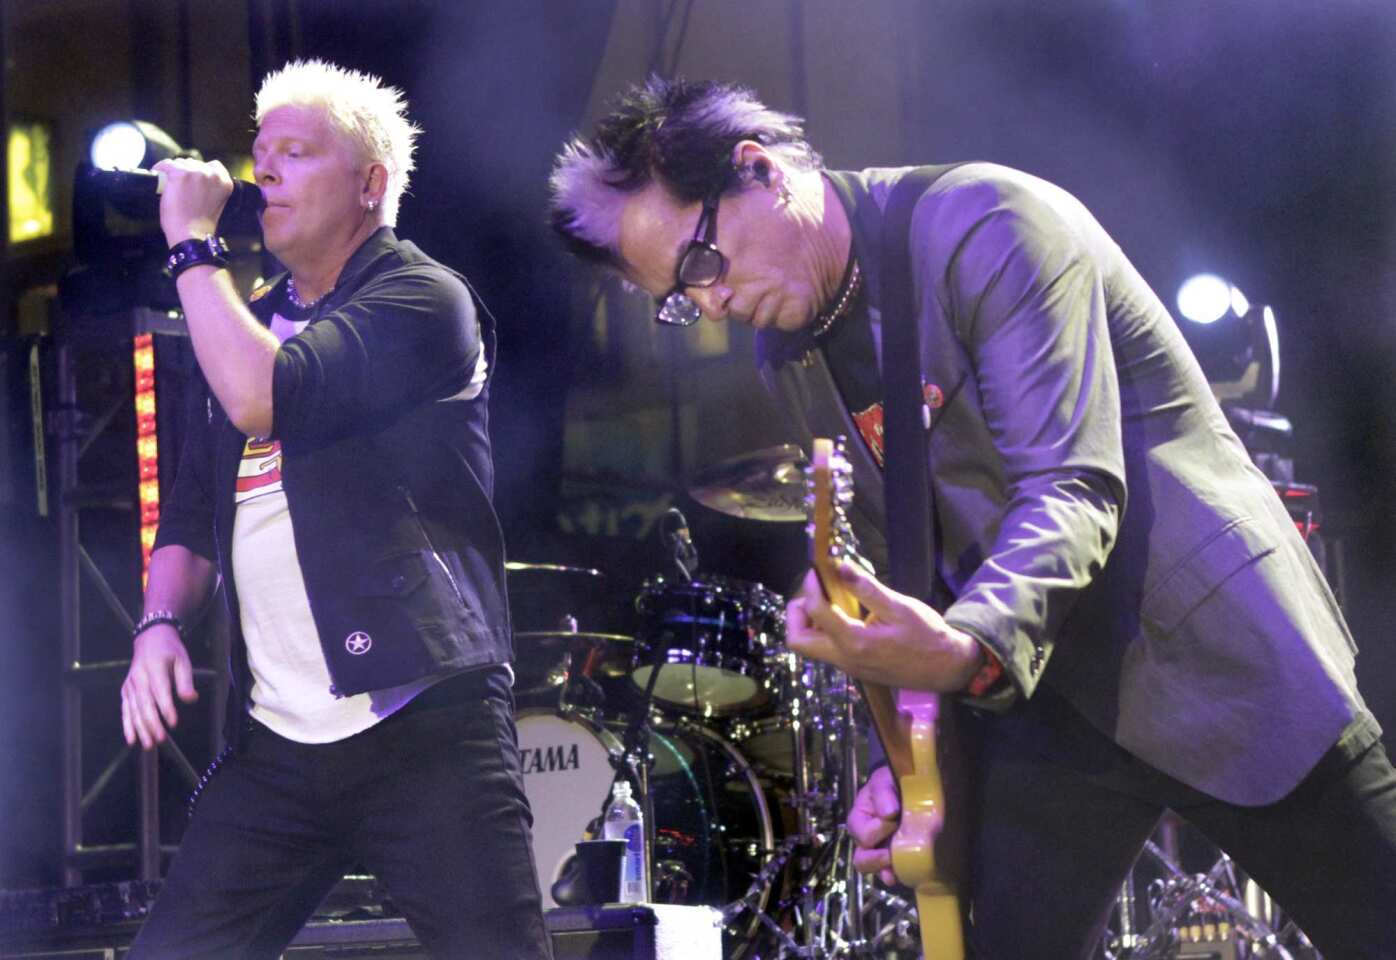 Noodles (right) and Dexter Holland (left) of The Offspring perform at The Sunset Strip Music Festivals street fair in West Hollywood.